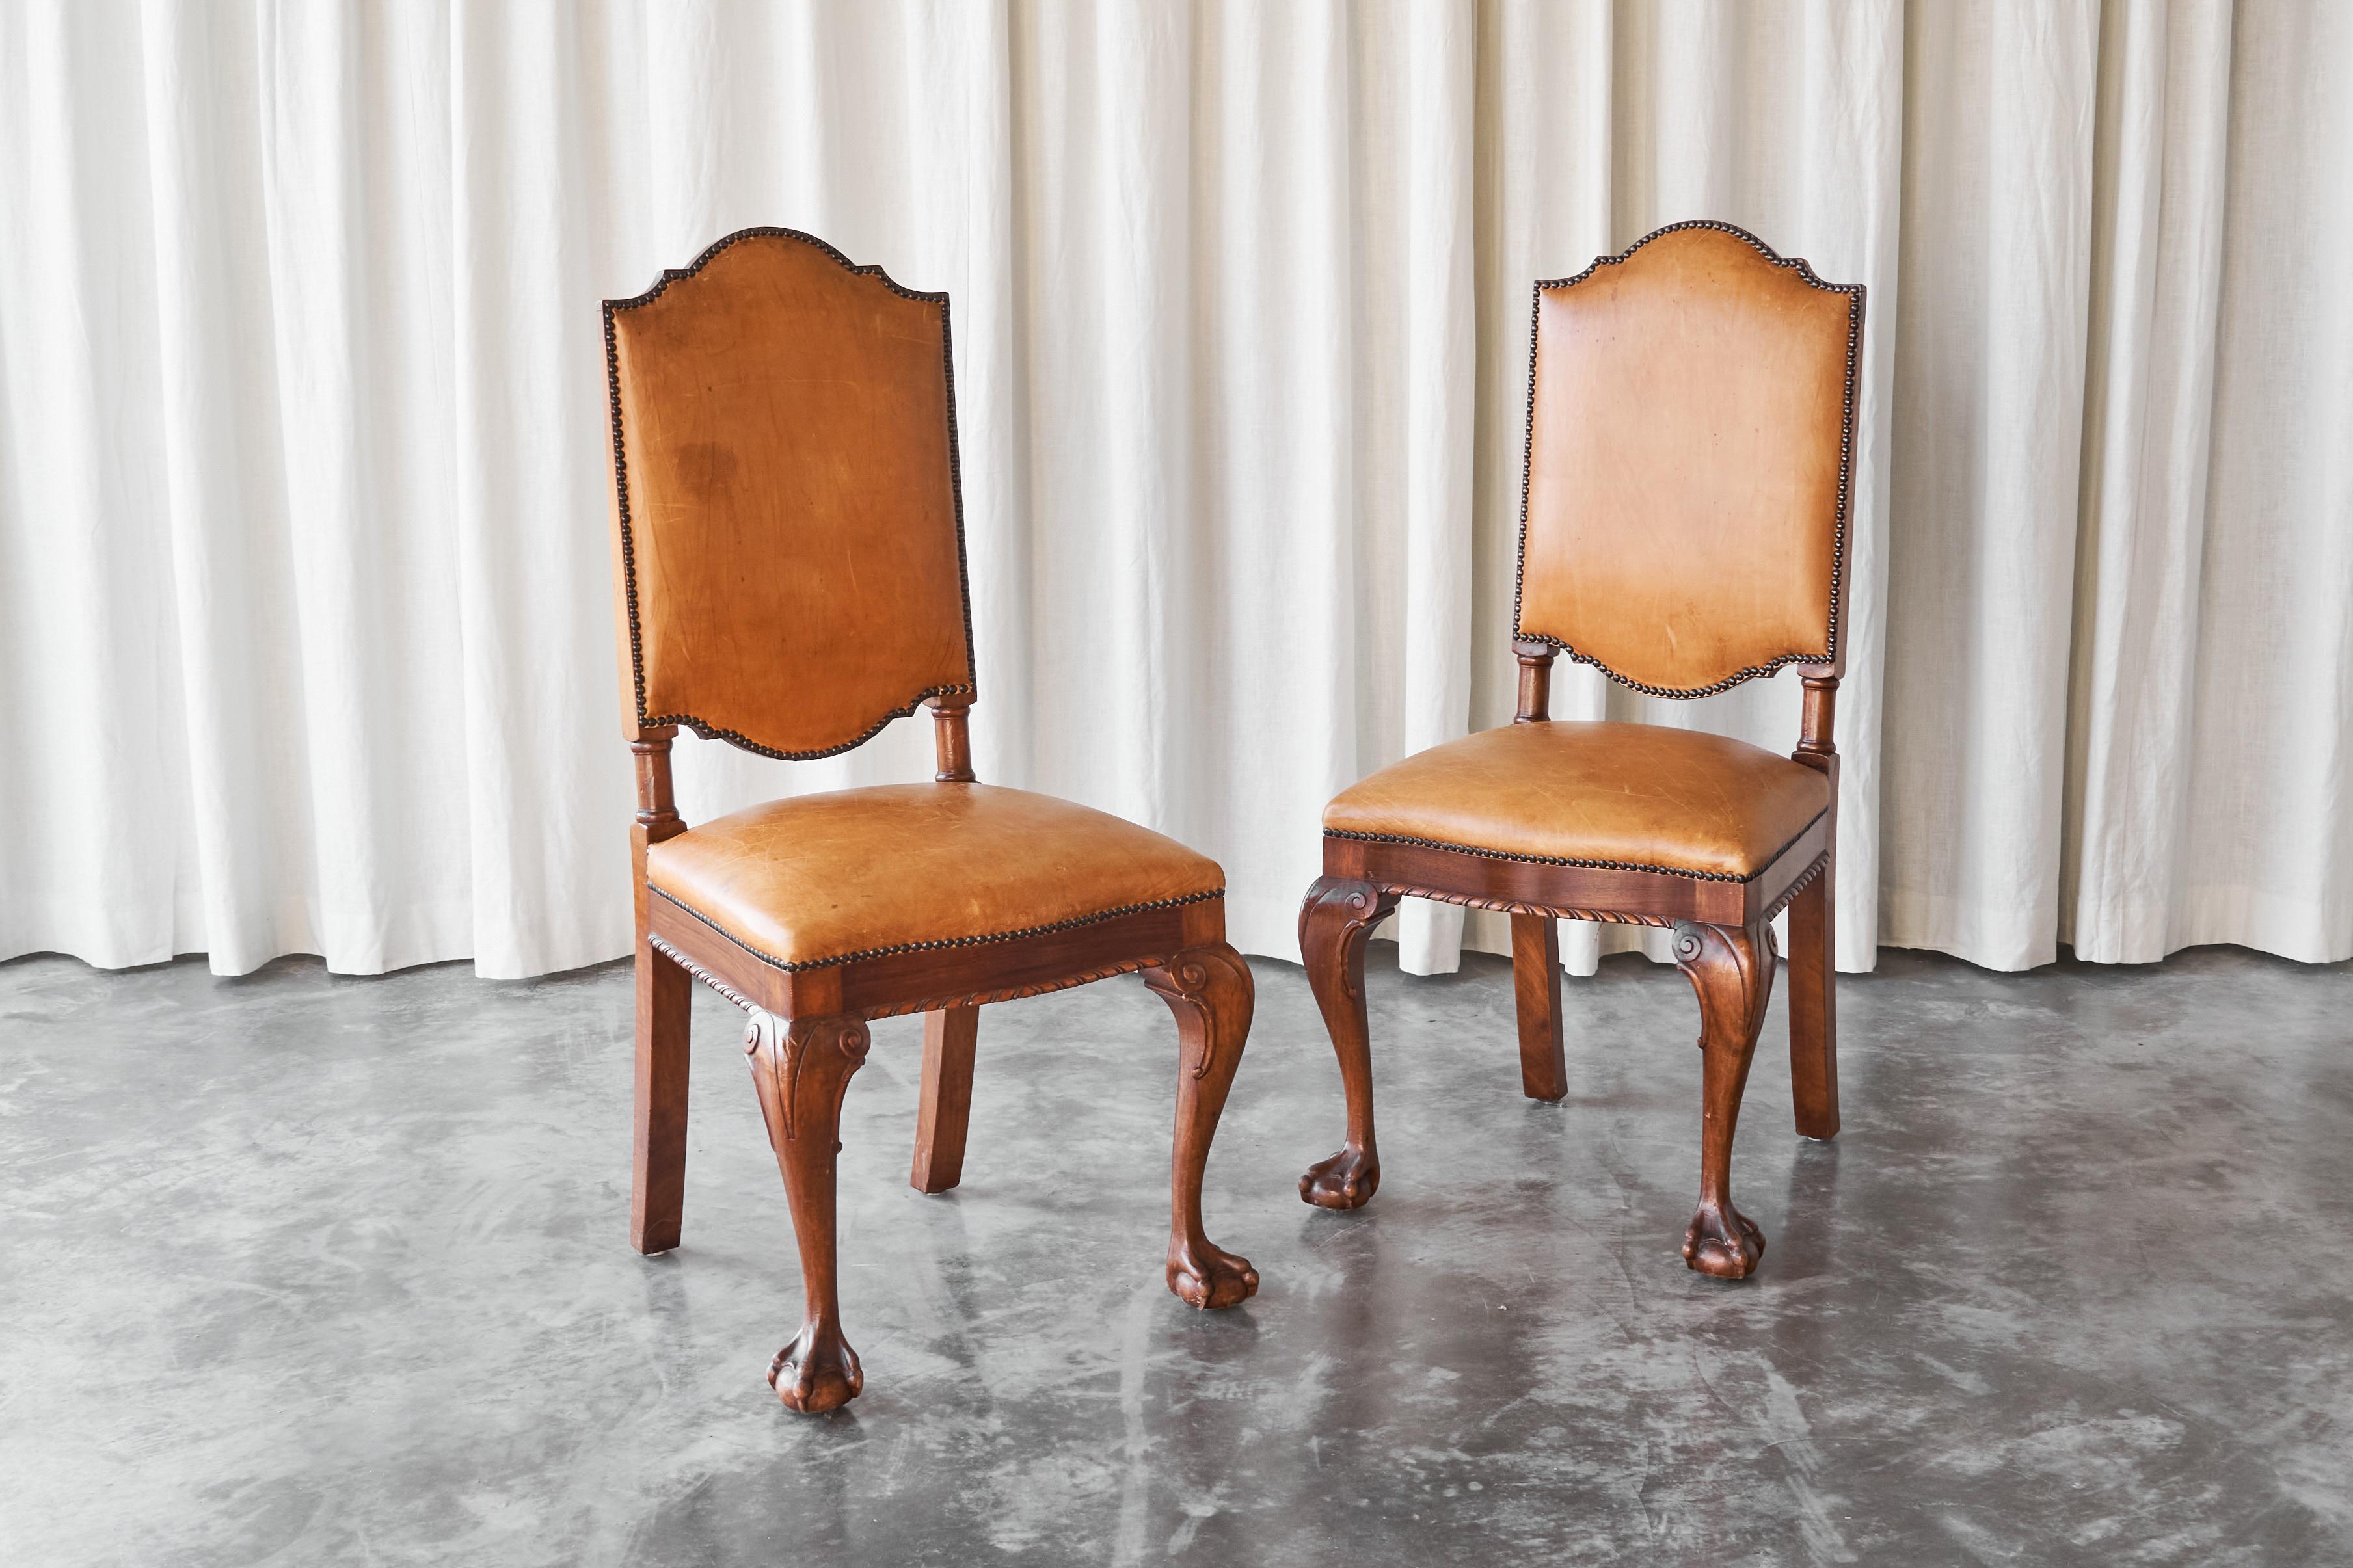 Hand-Crafted 't Woonhuys Amsterdam Rare Pair of Side Chairs in Patinated Cognac Leather 1920s For Sale